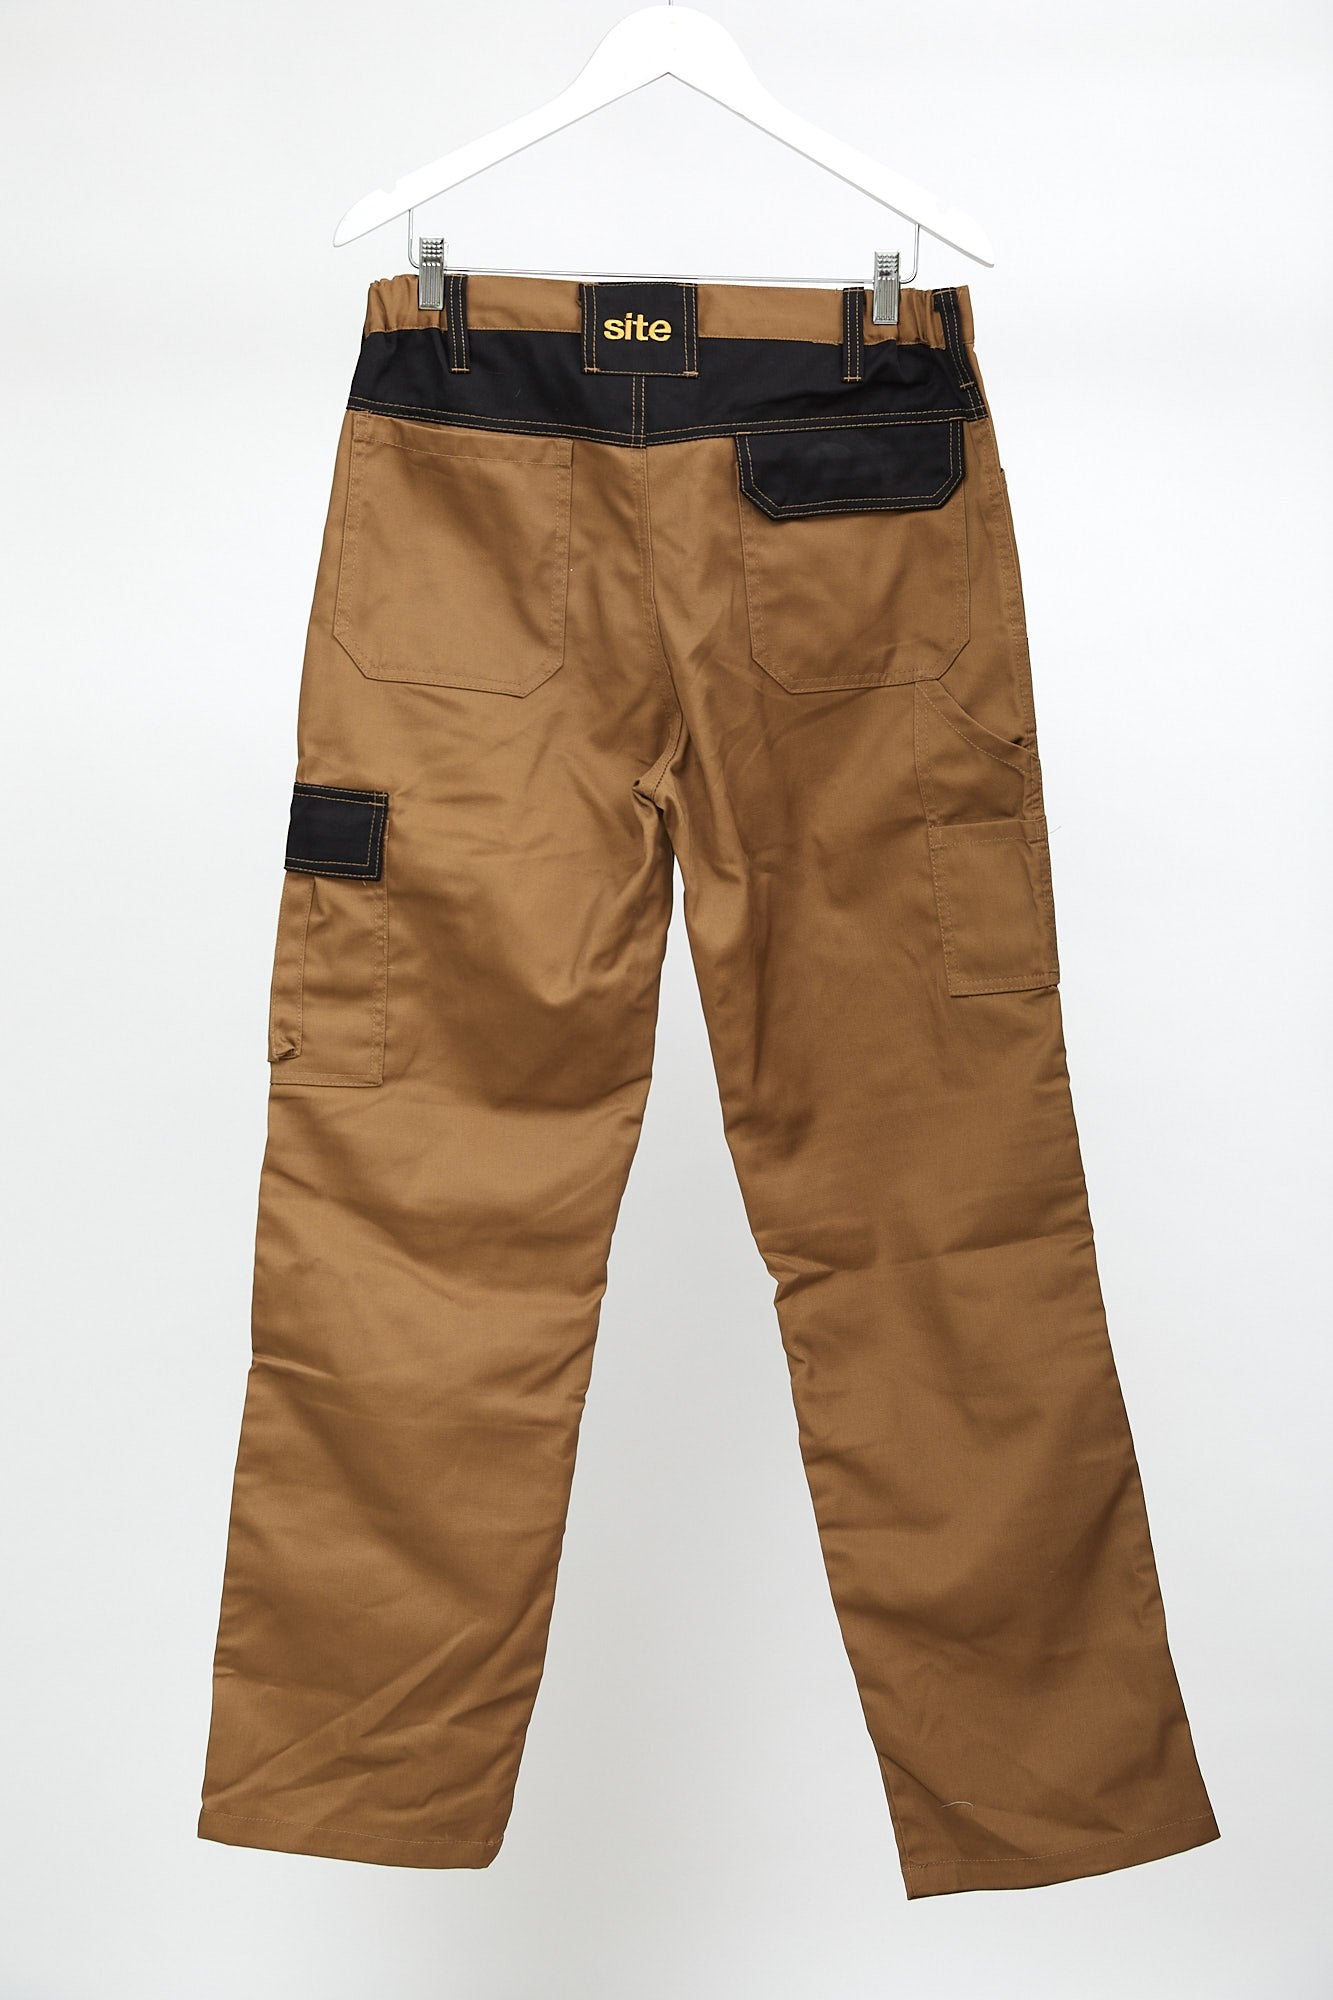 Mens Brown Workwear Cargo Trousers: Size W32